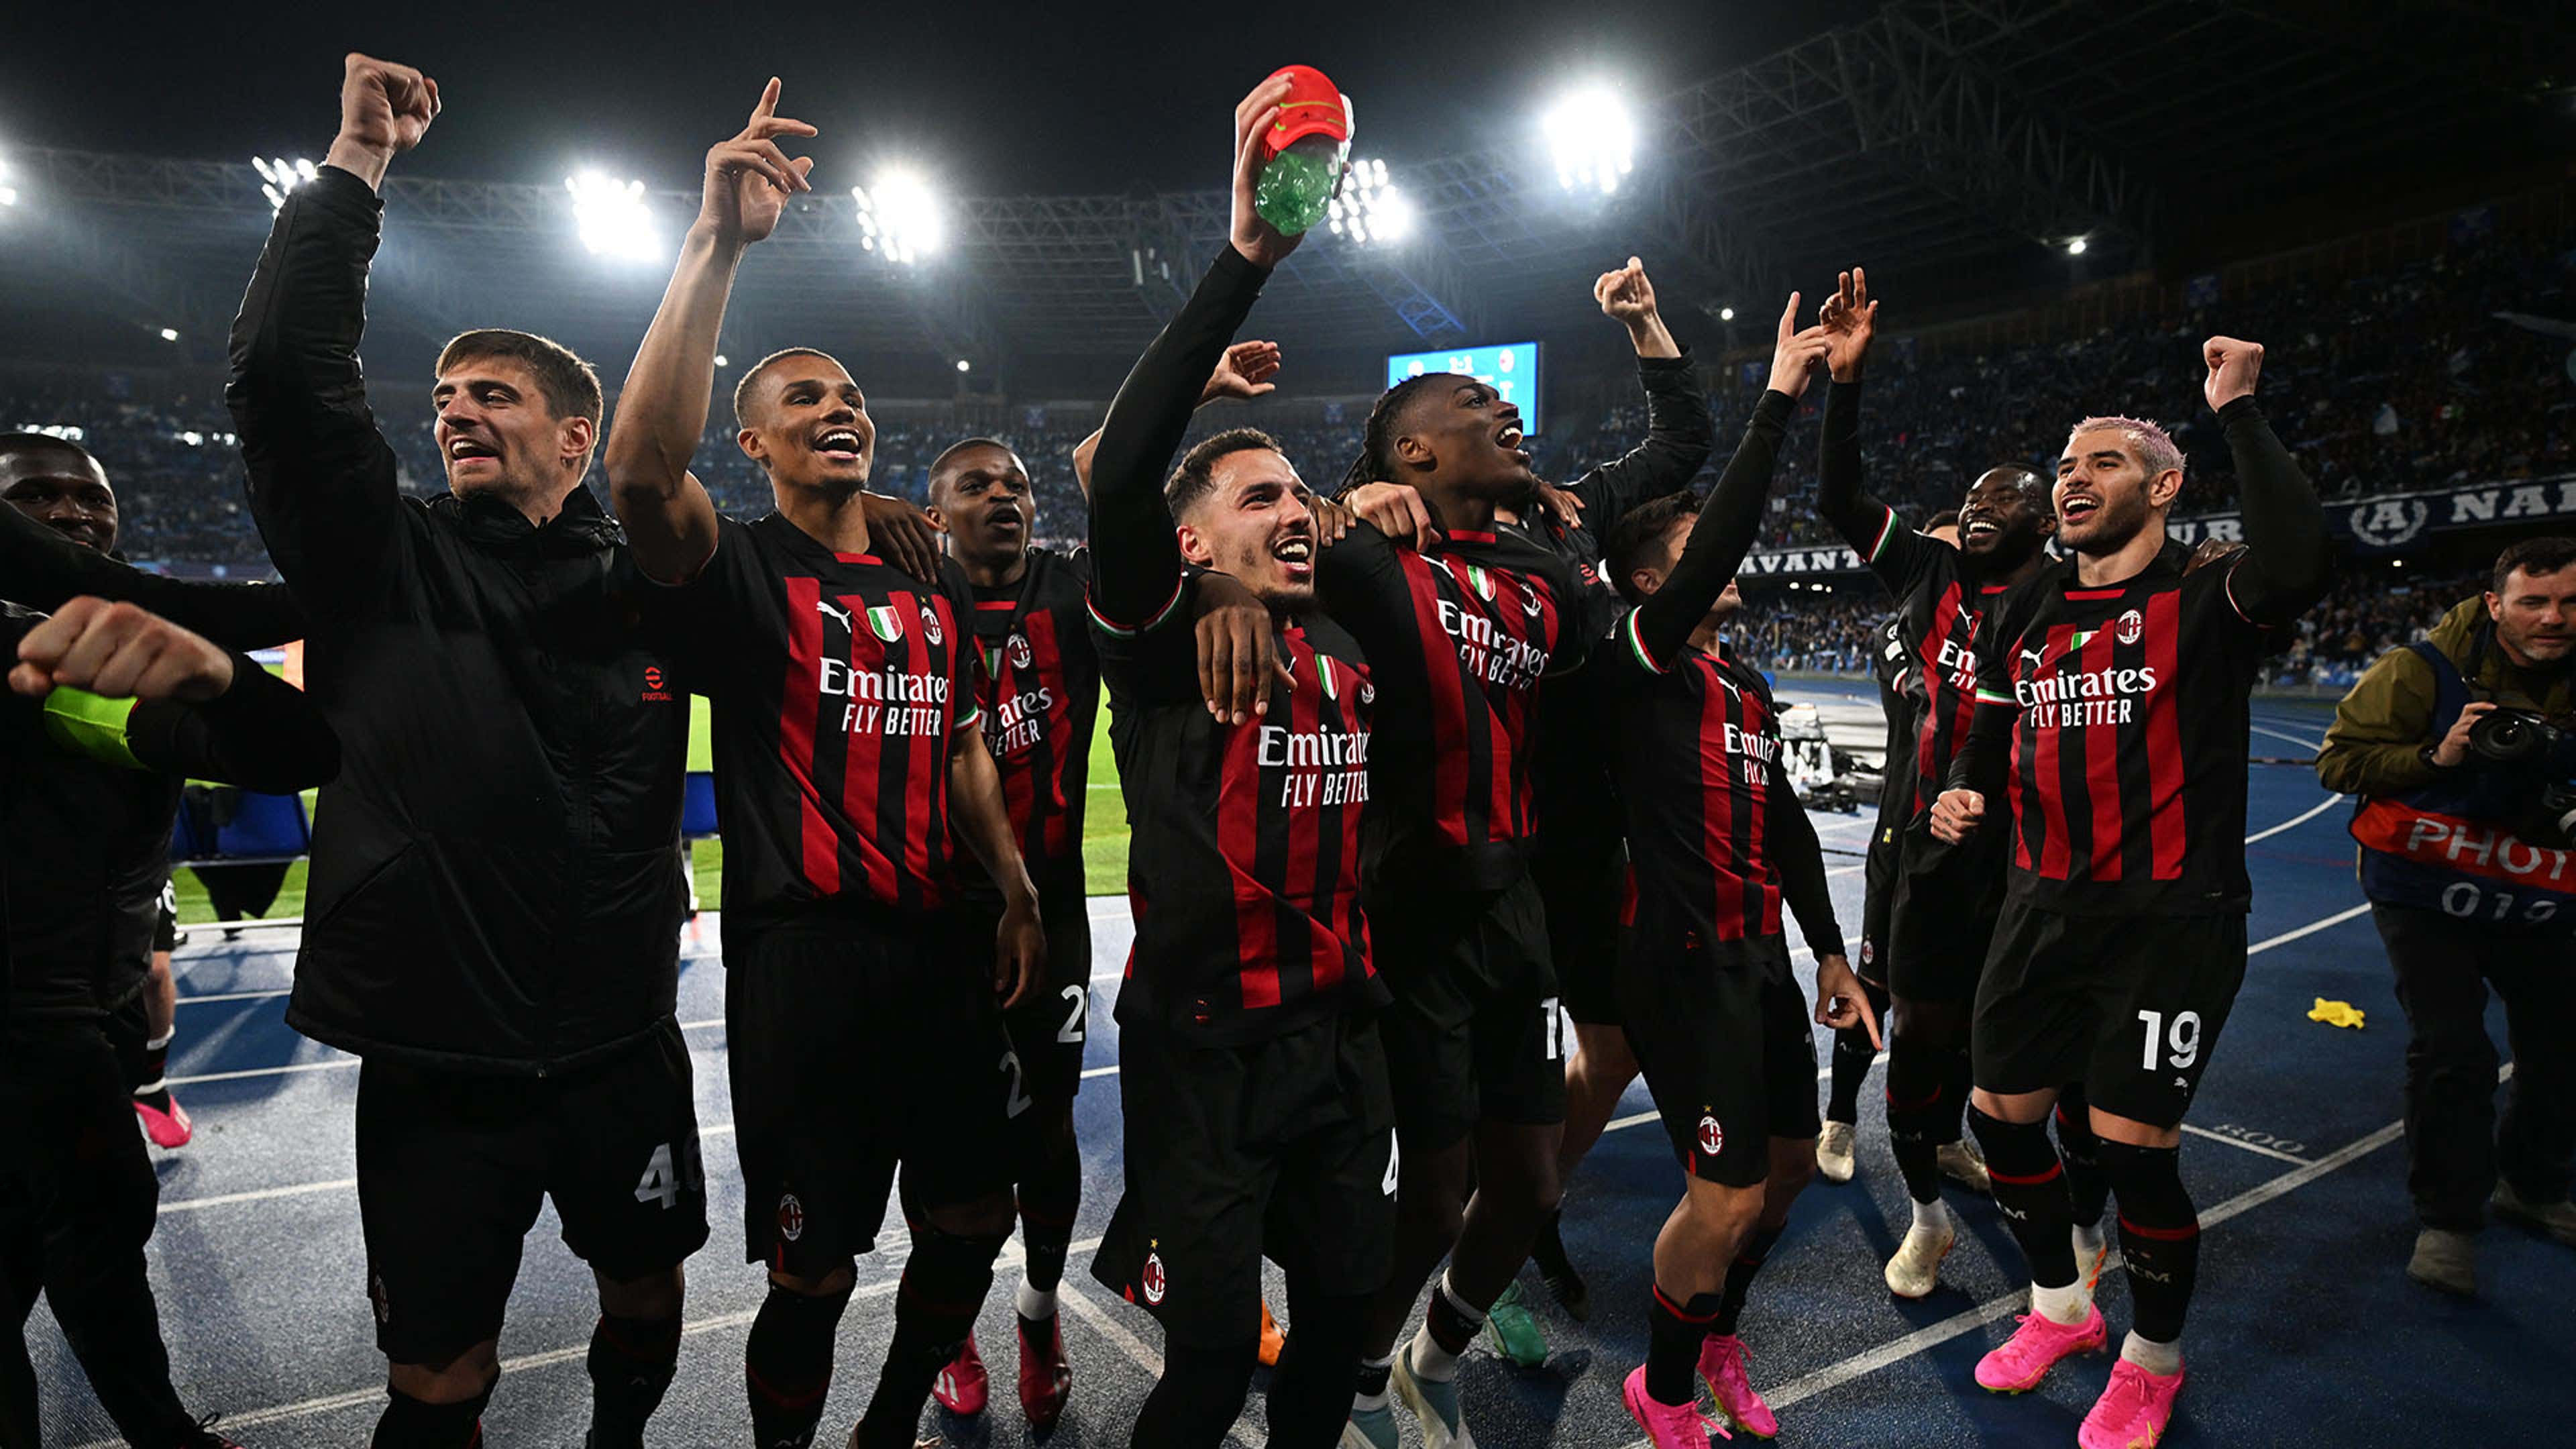 A semi-final at San Siro! AC Milan hold off late Victor Napoli charge to ensure Champions League will have more glorious night at famous stadium | Goal.com